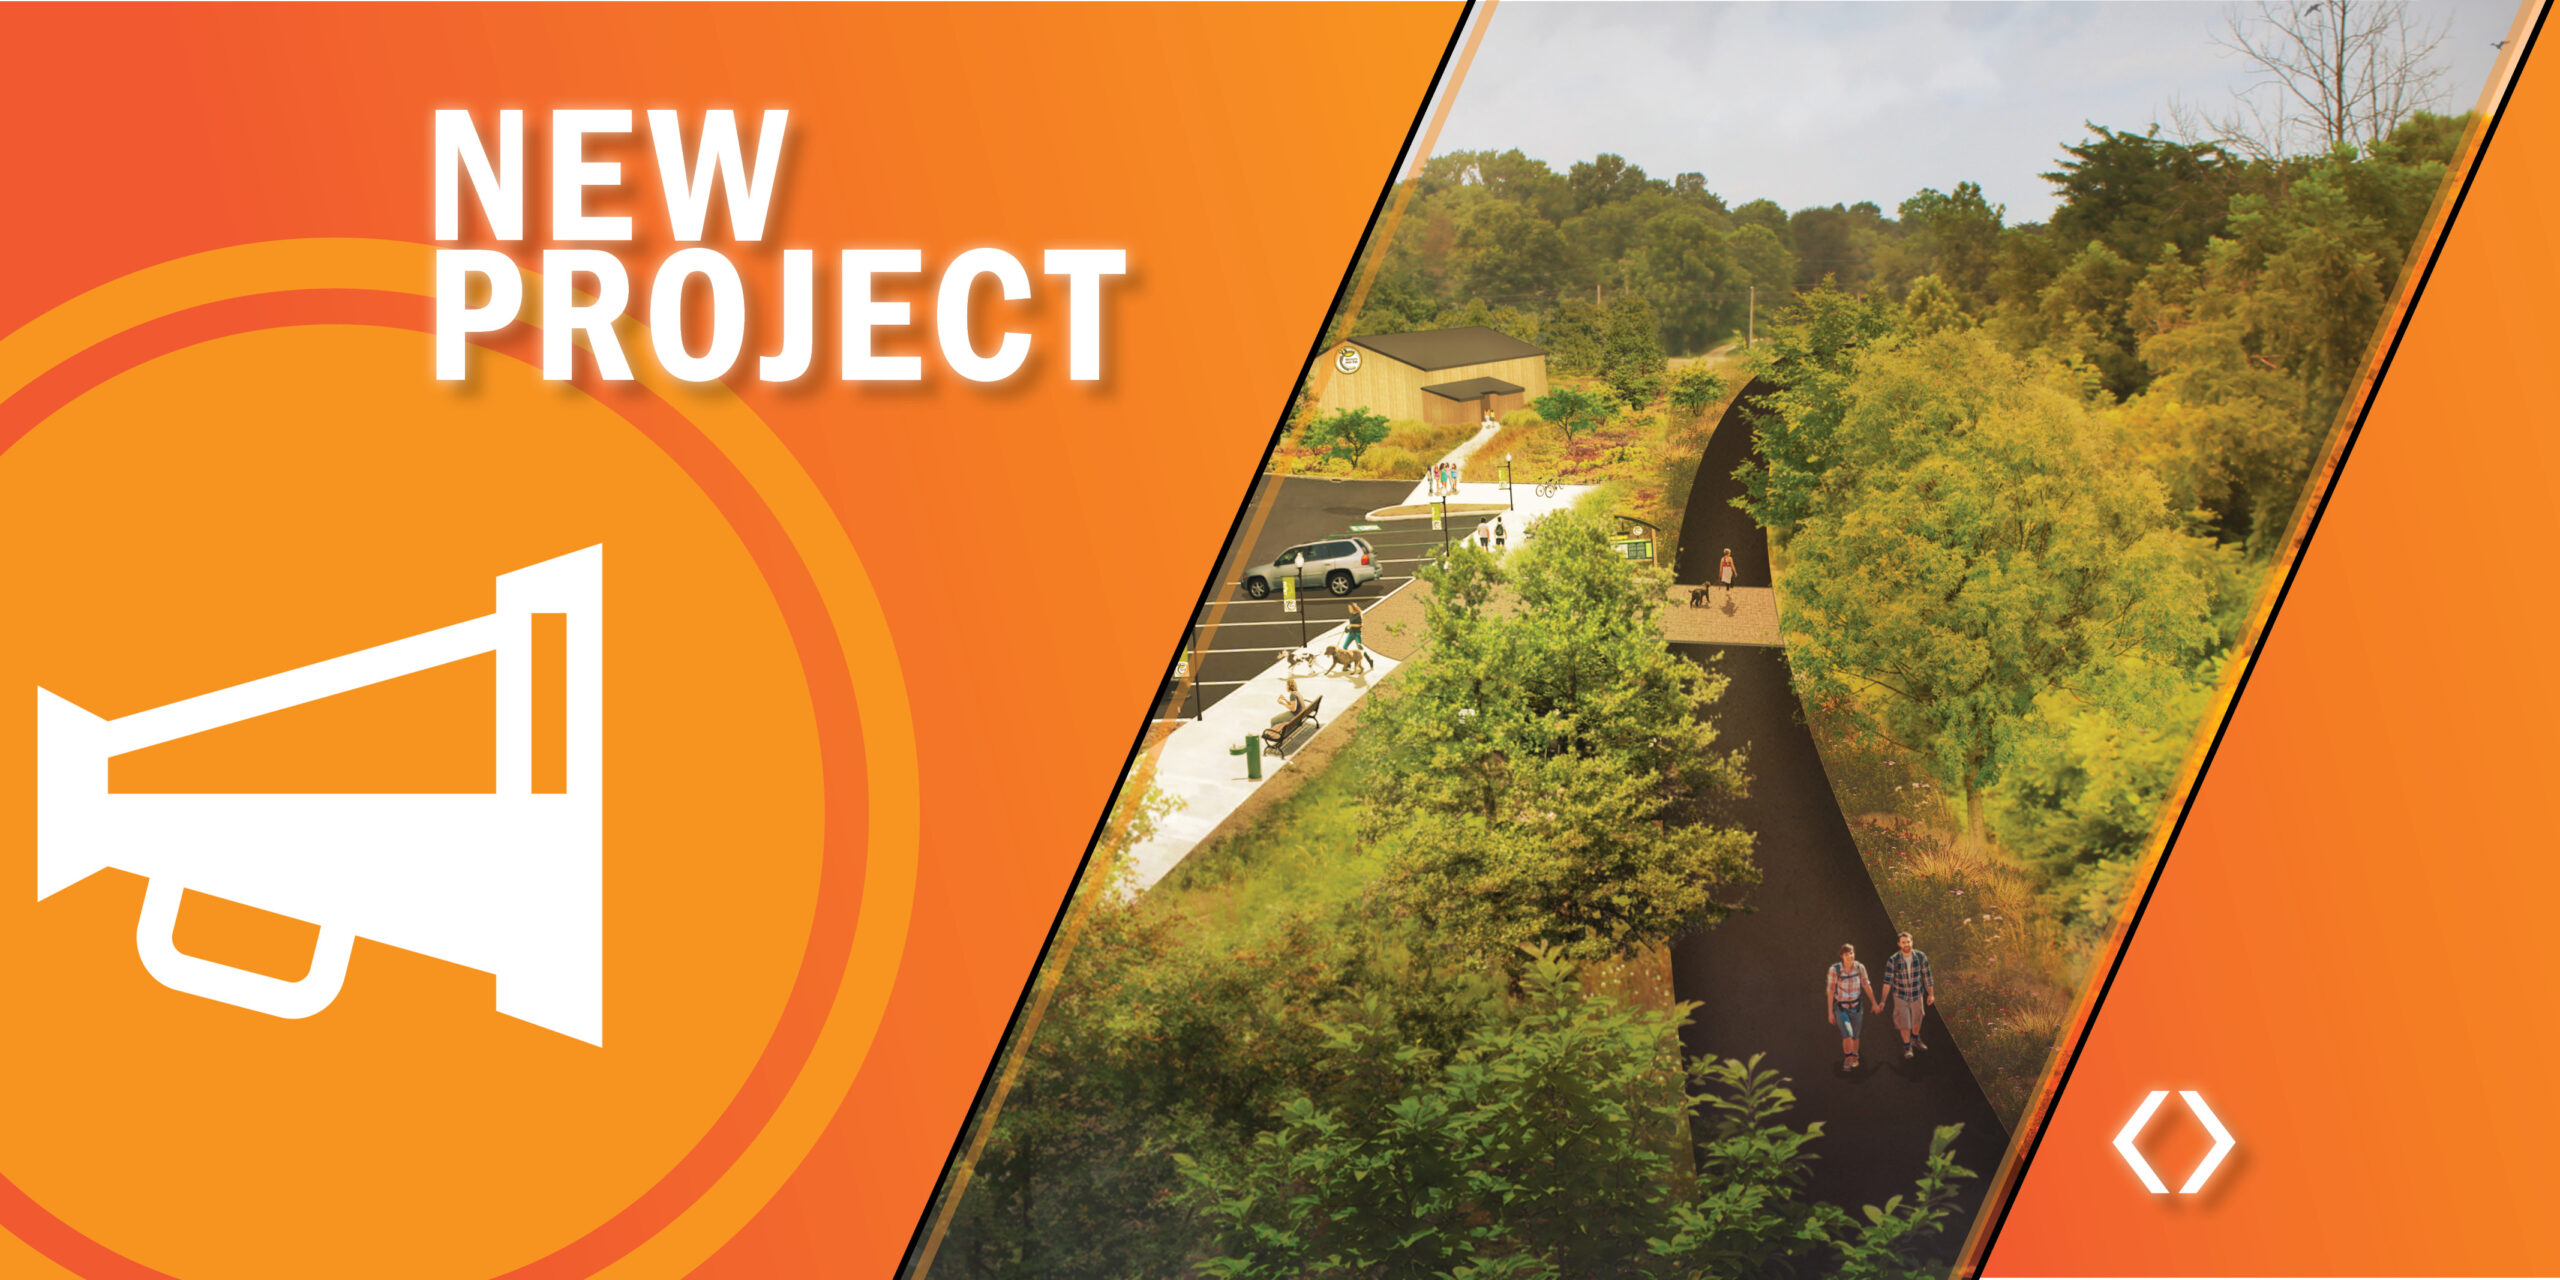 graphic featuring a rendering of a trail design project with a bullhorn icon and the text "new project"